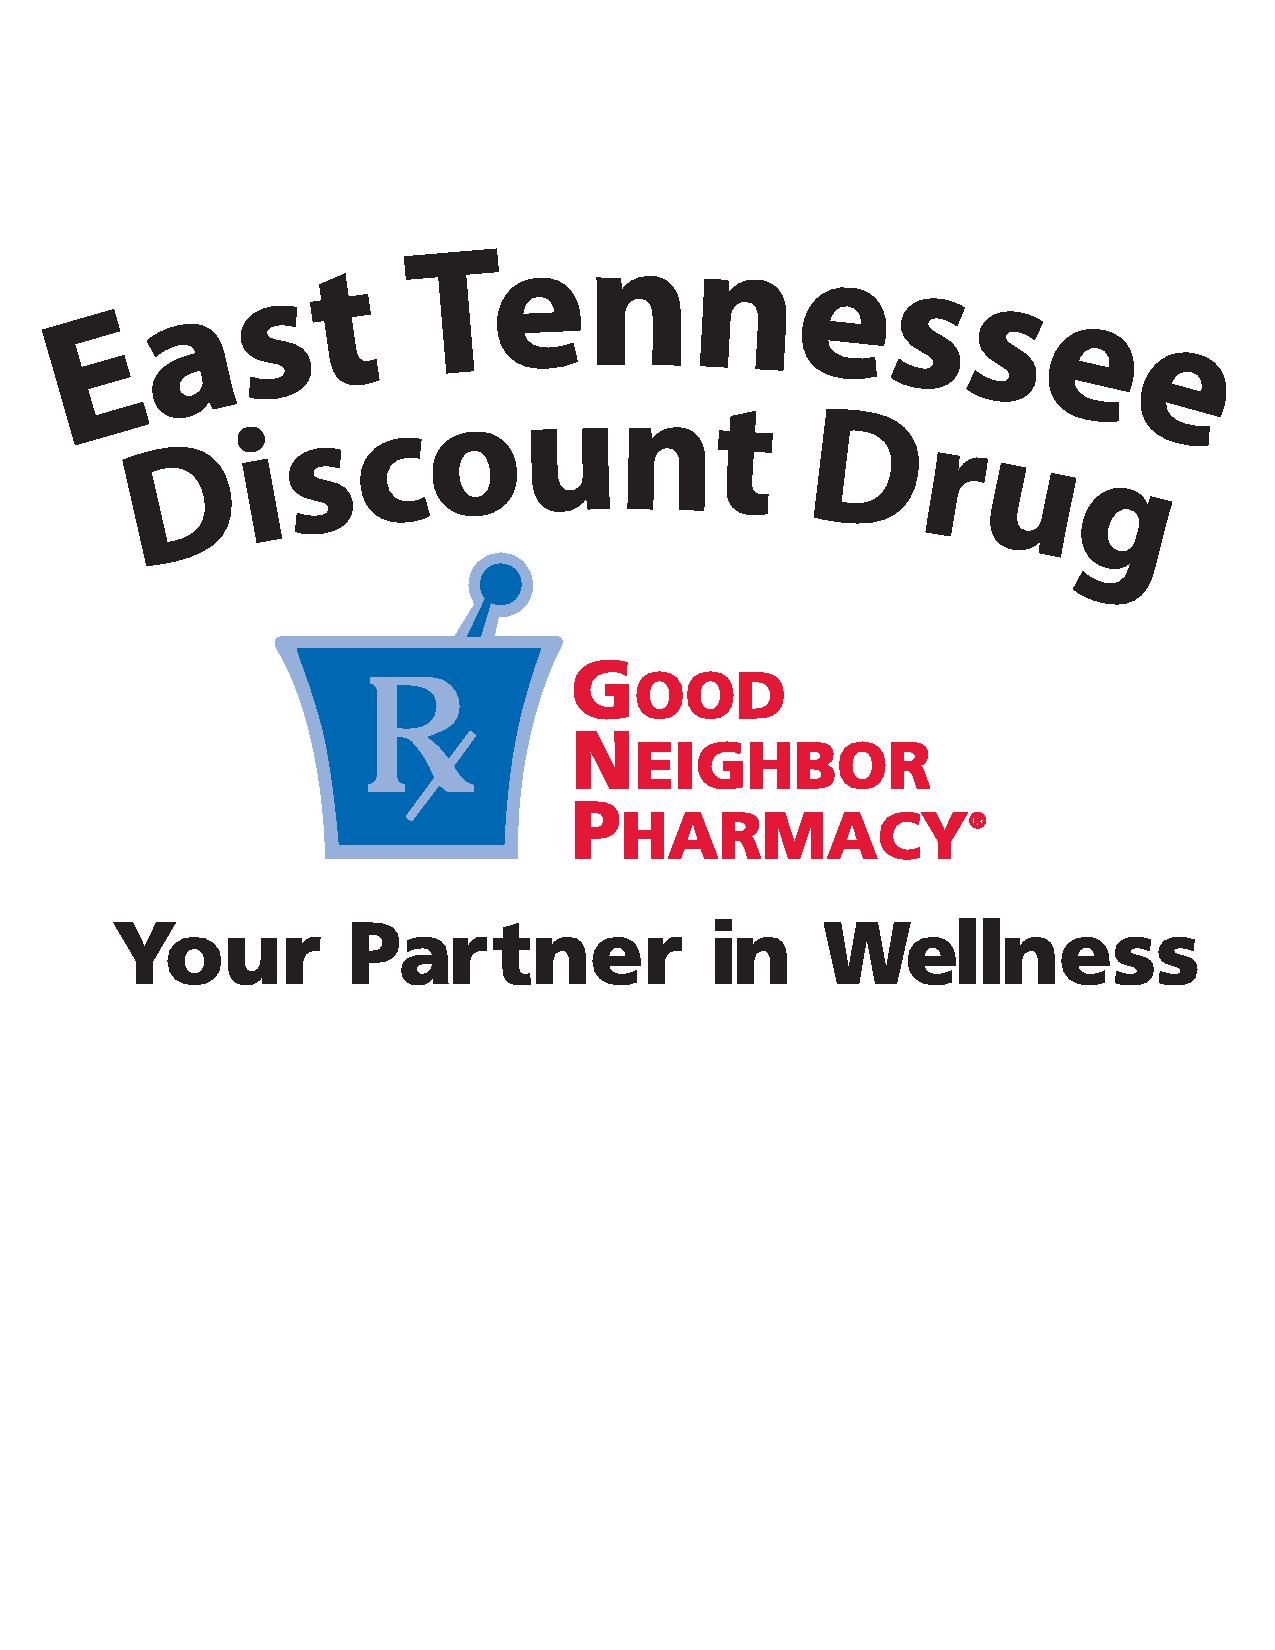 East Tennessee Discount Drug